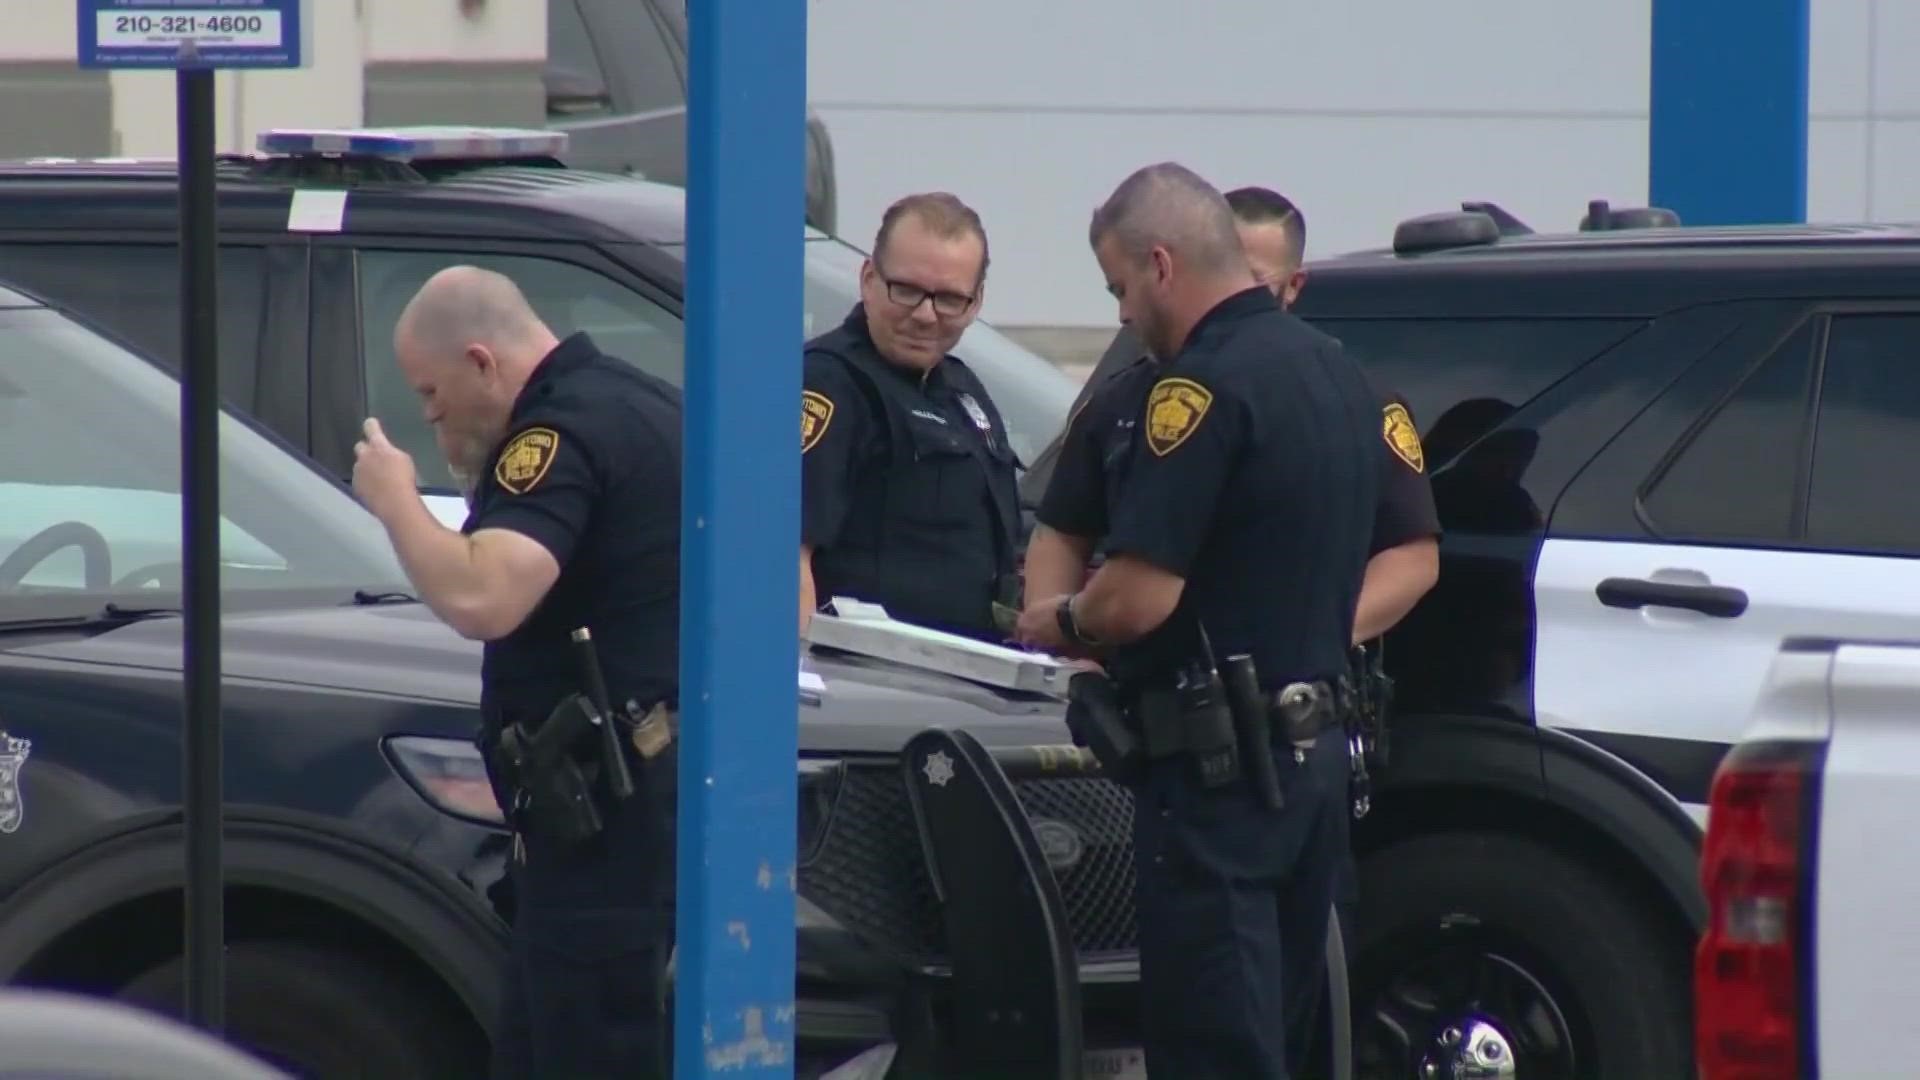 "Almost sounds like they were doing random shootings," police told KENS 5.